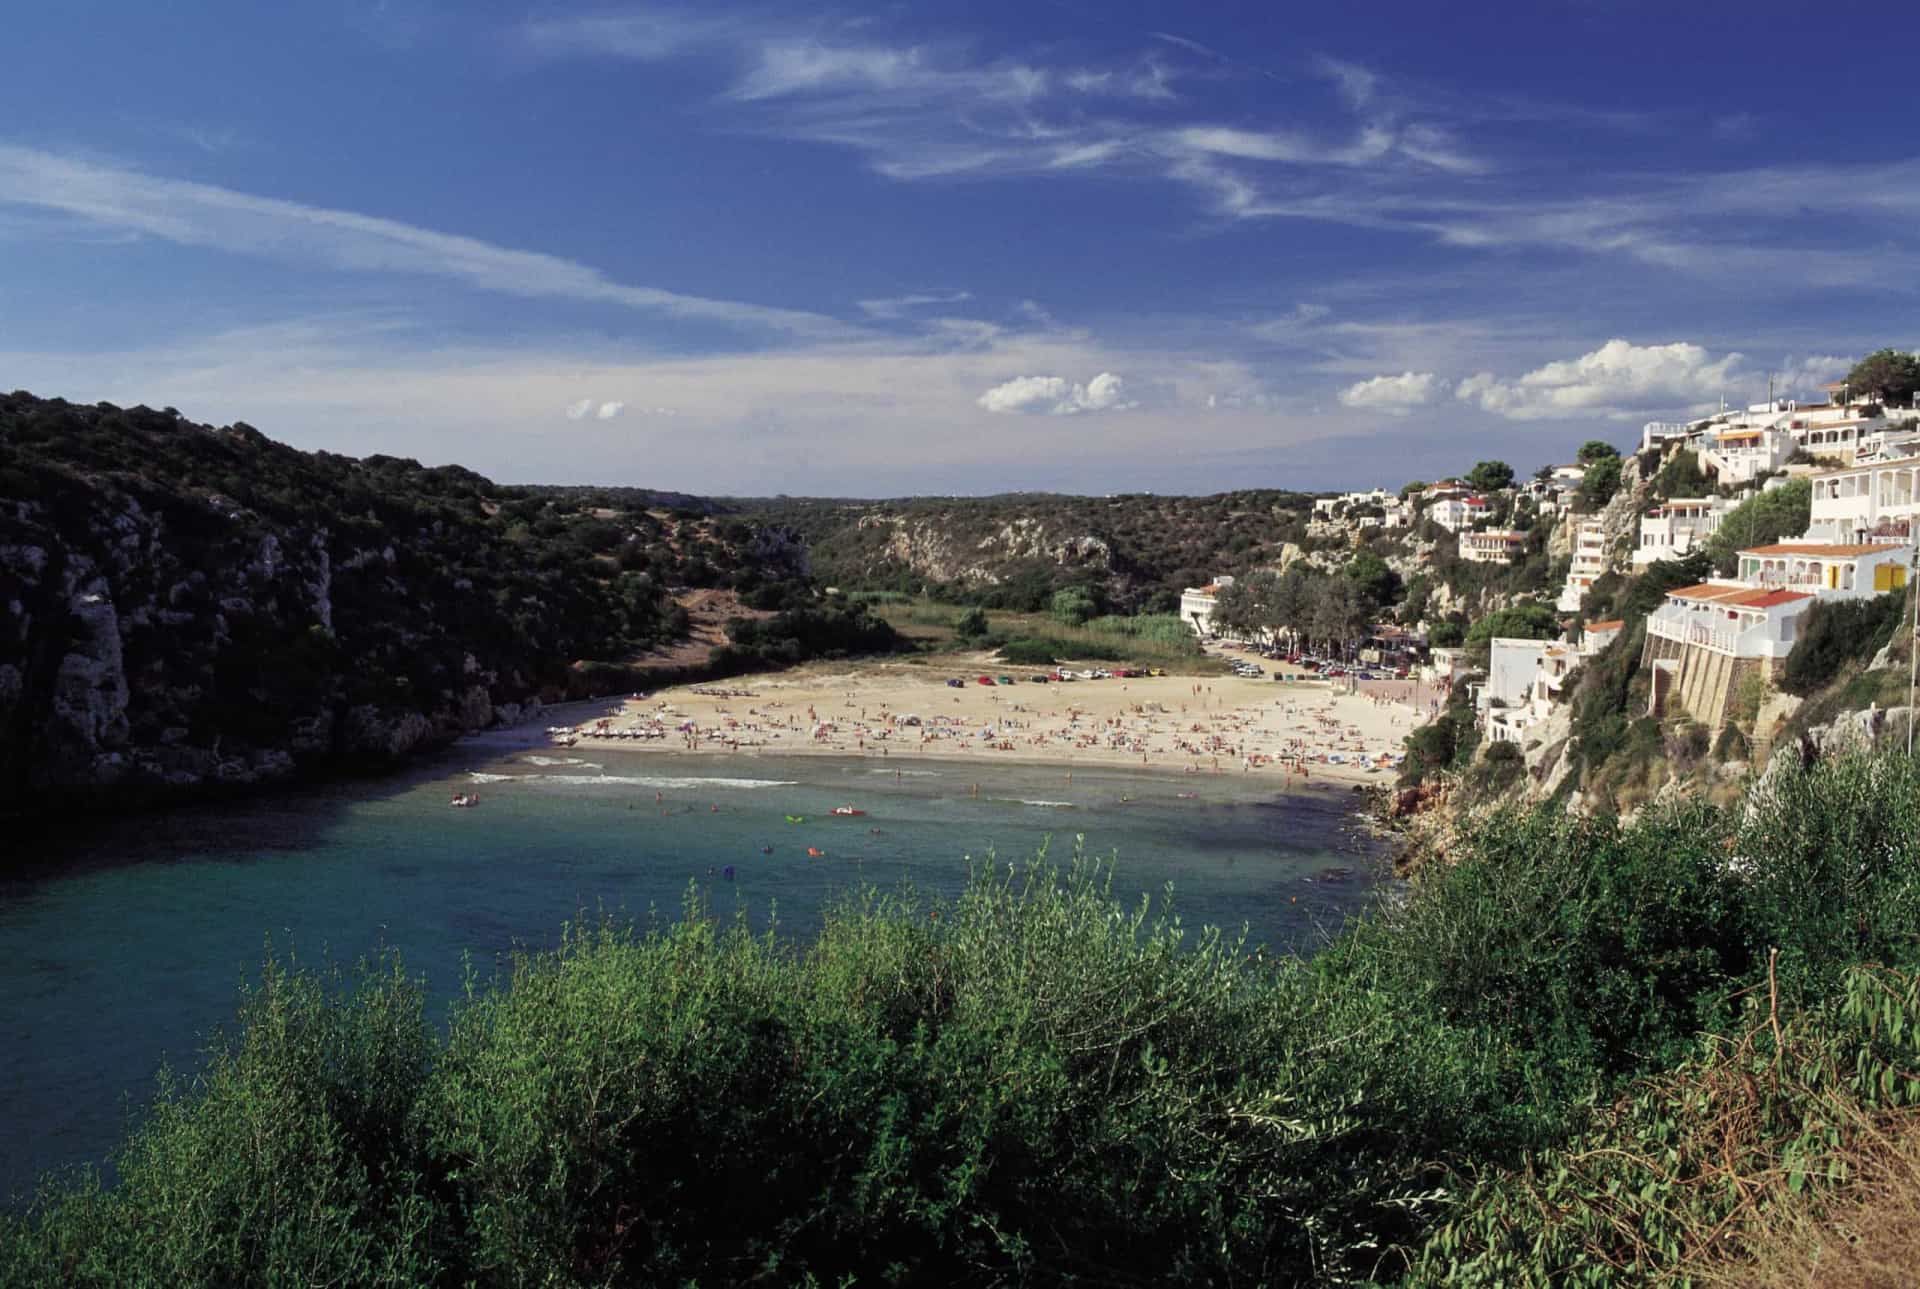 <p>The less crowded Balearic island saw American tourists arriving on the island looking for a relaxing time under the warm Mediterranean sun. </p>